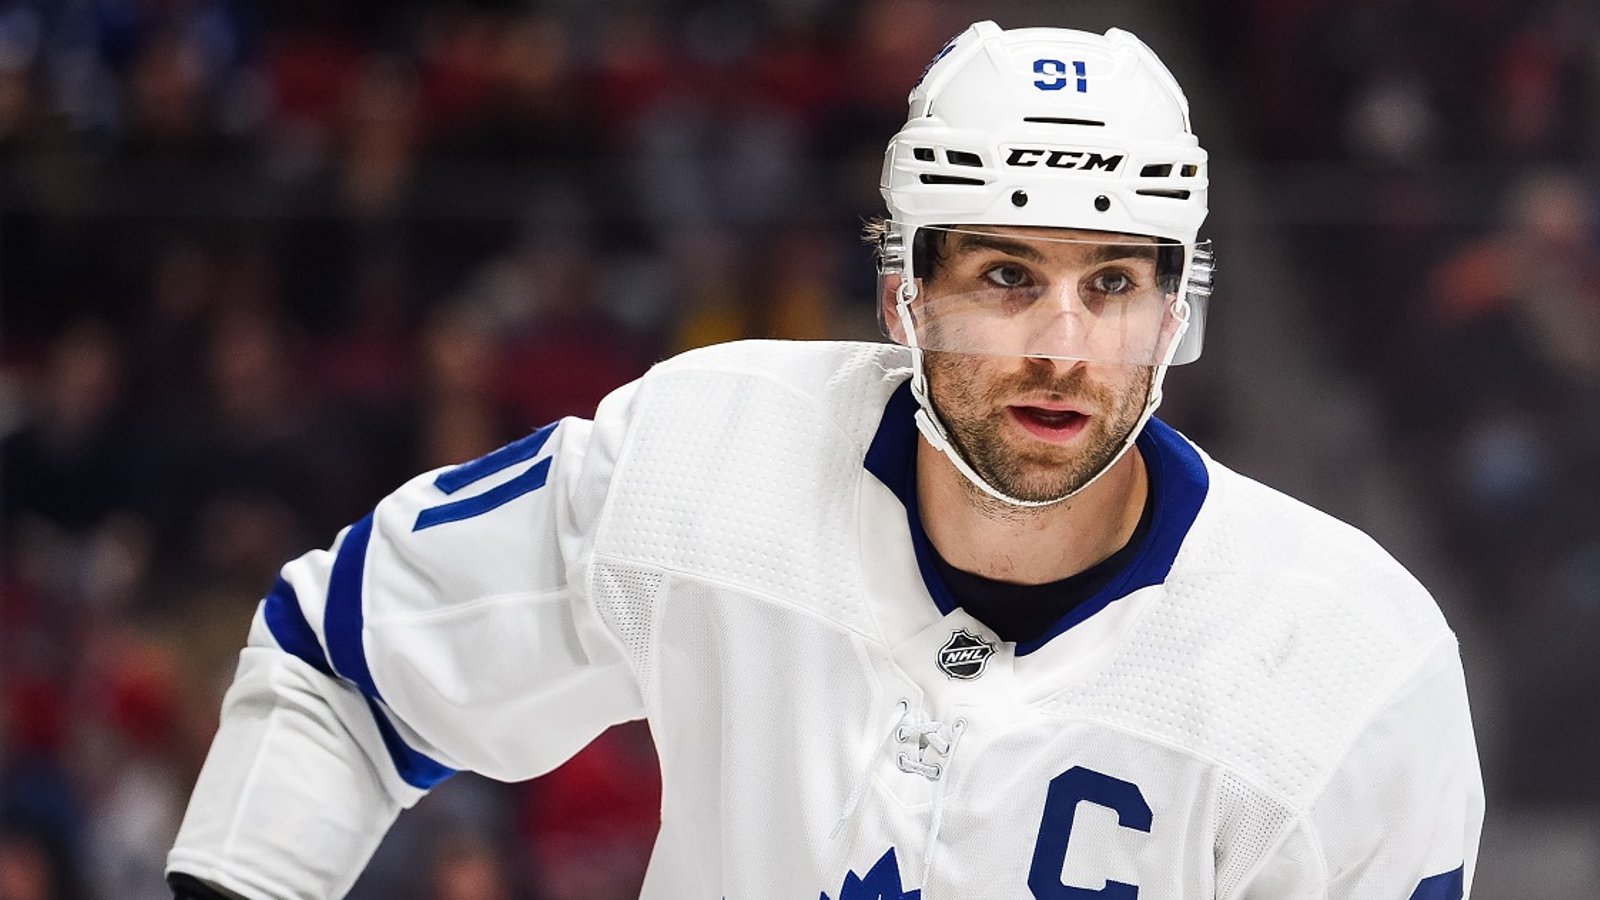 Leafs captain John Tavares makes generous donation to front line workers.